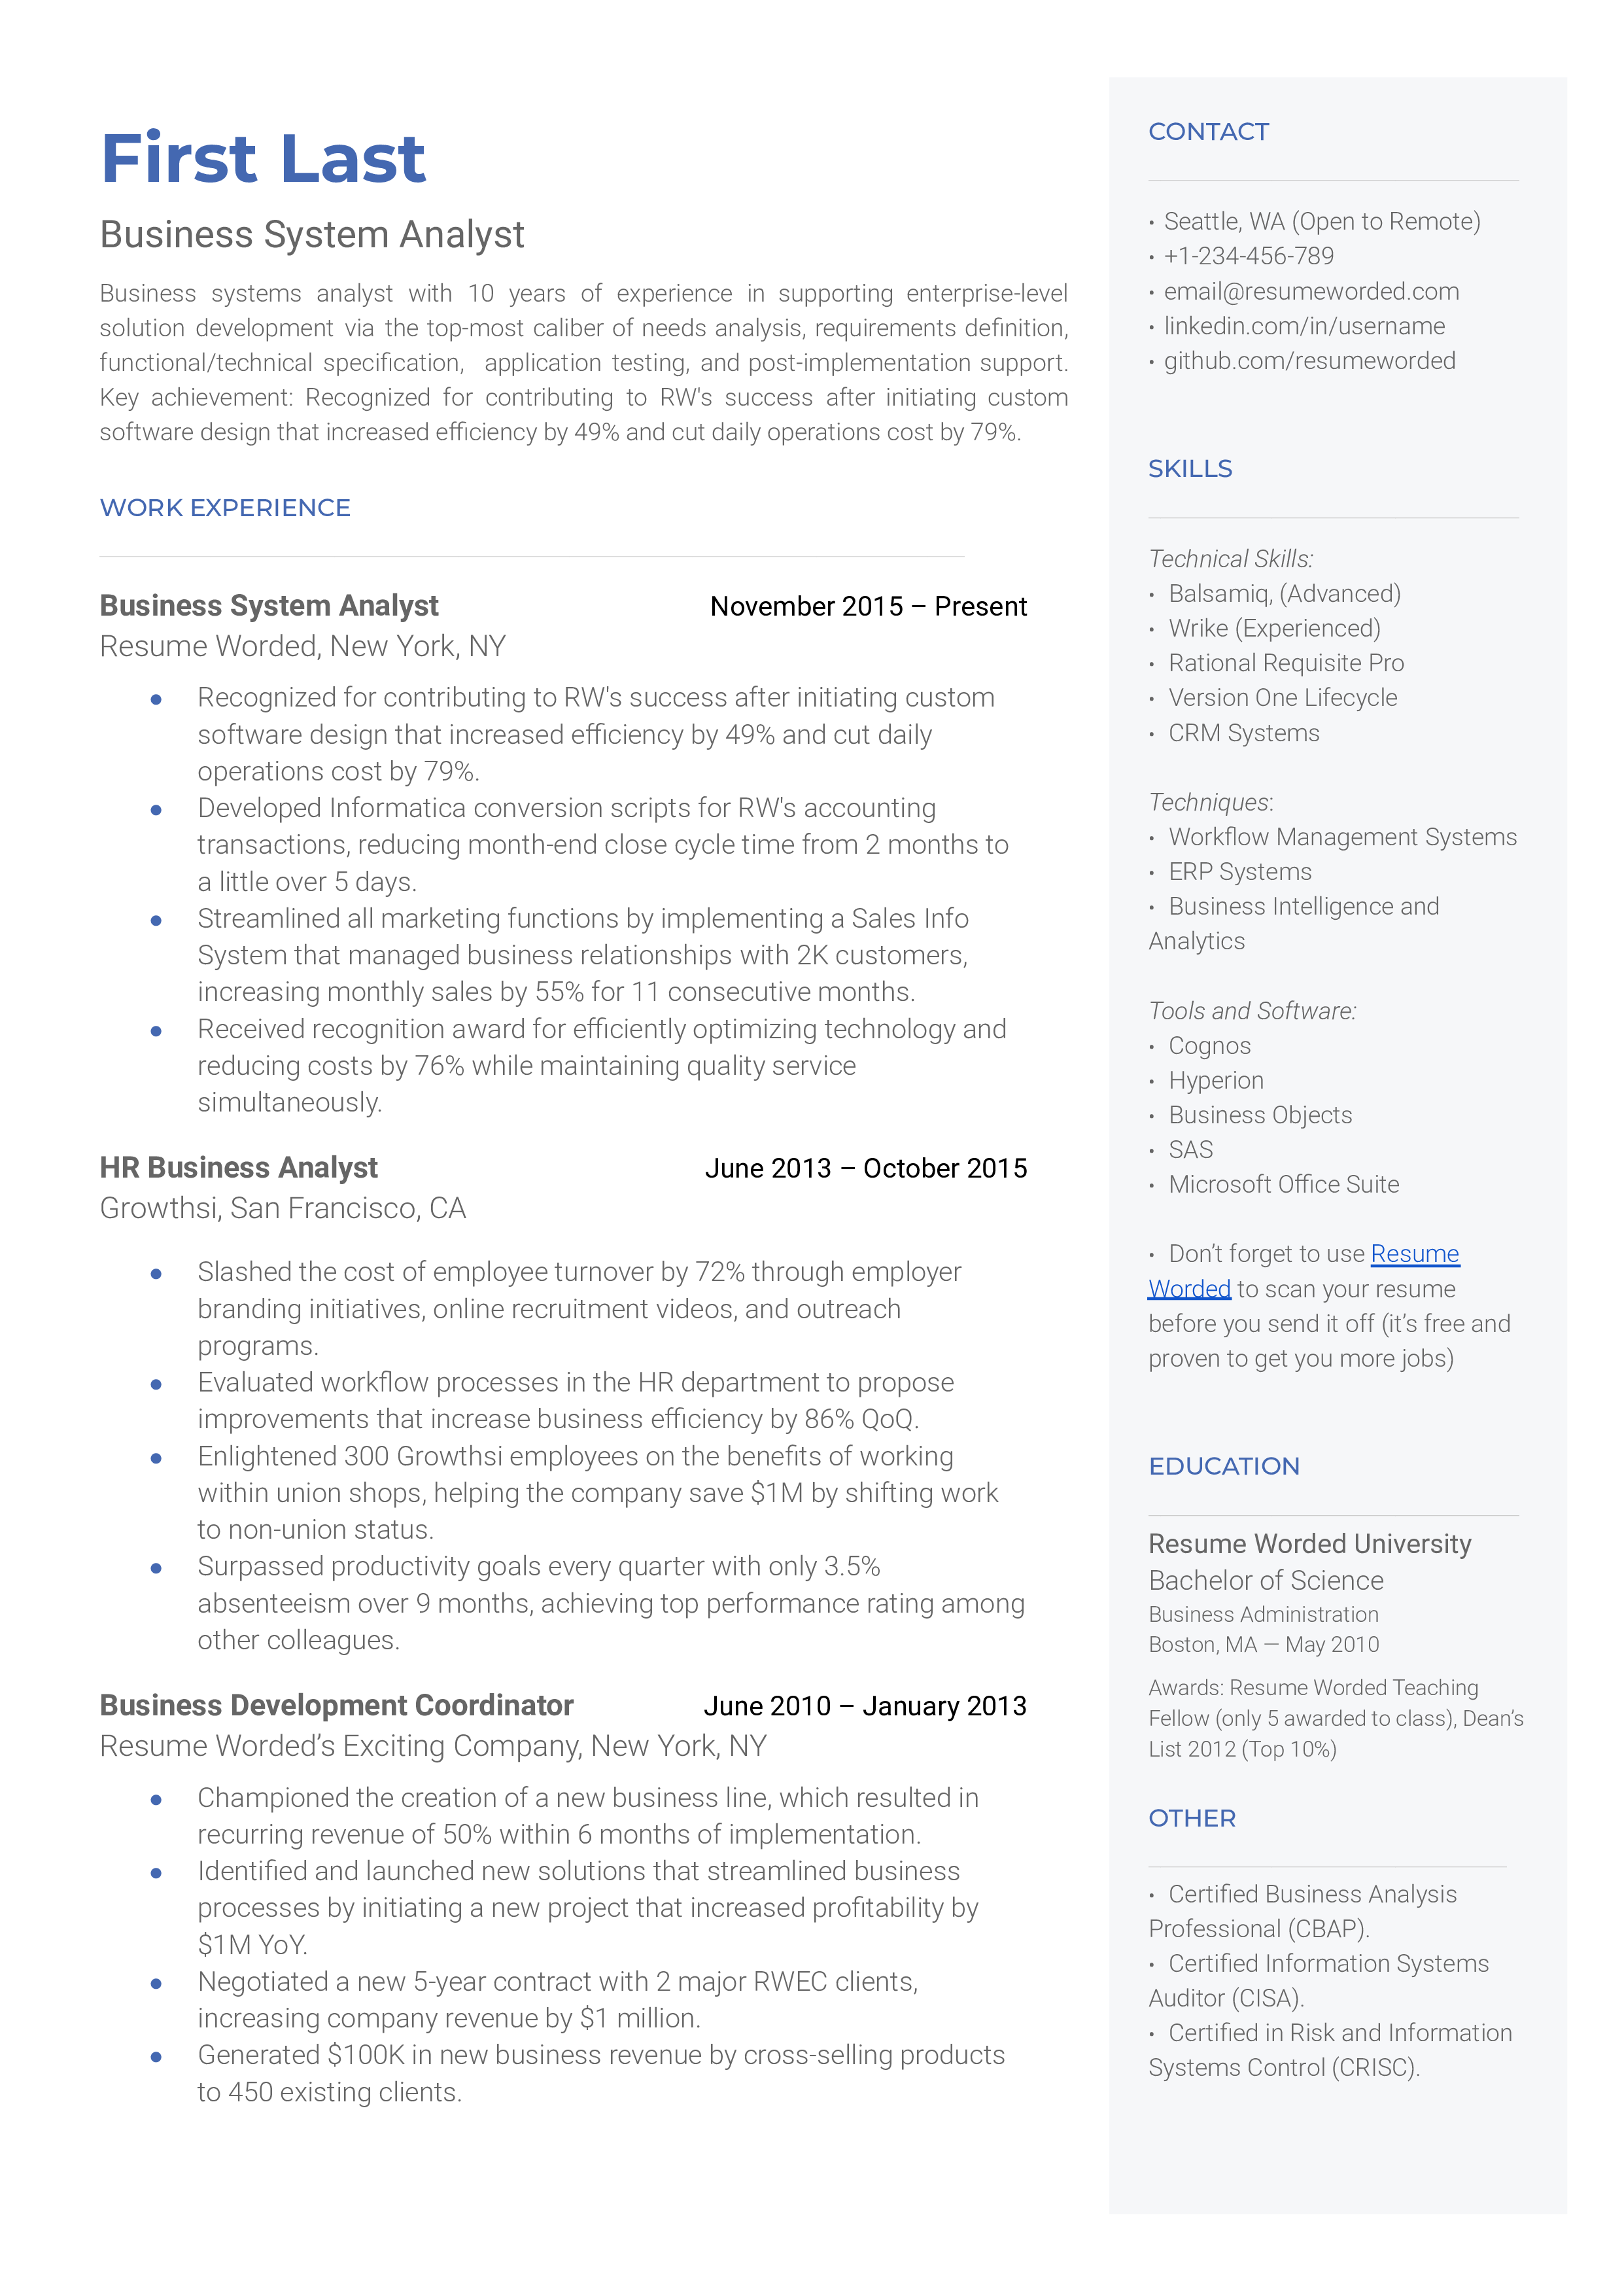 A business system analyst resume sample  that highlights the applicant's knowledge of operating systems and  and system certification.